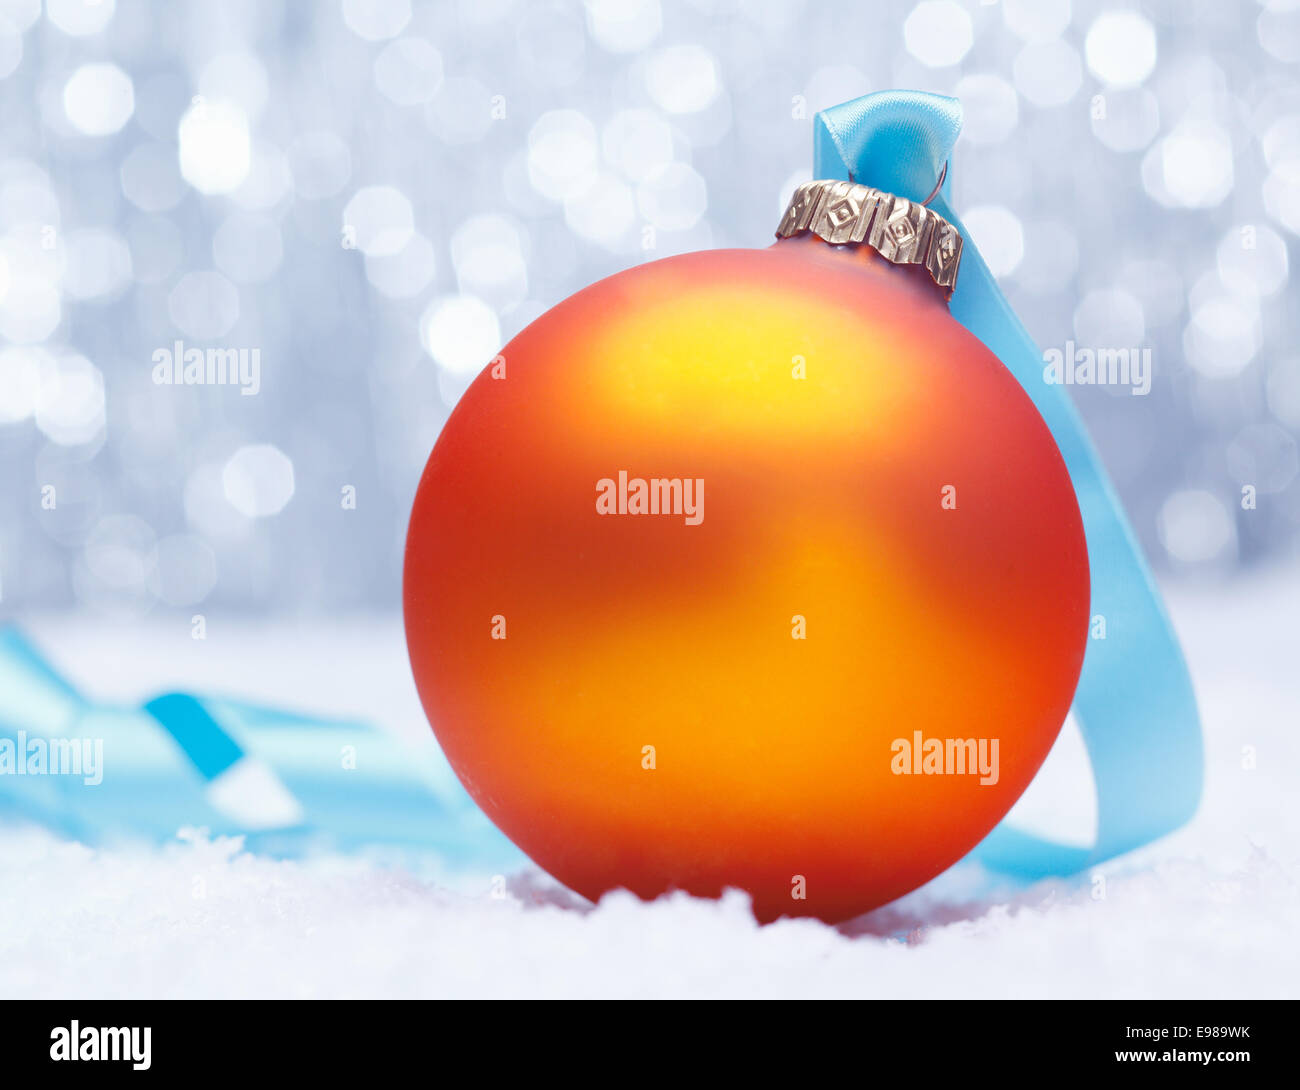 Glowing golden orange Christmas bauble nestled on fresh winter snow with a backdrop of sparkling festive lights Stock Photo